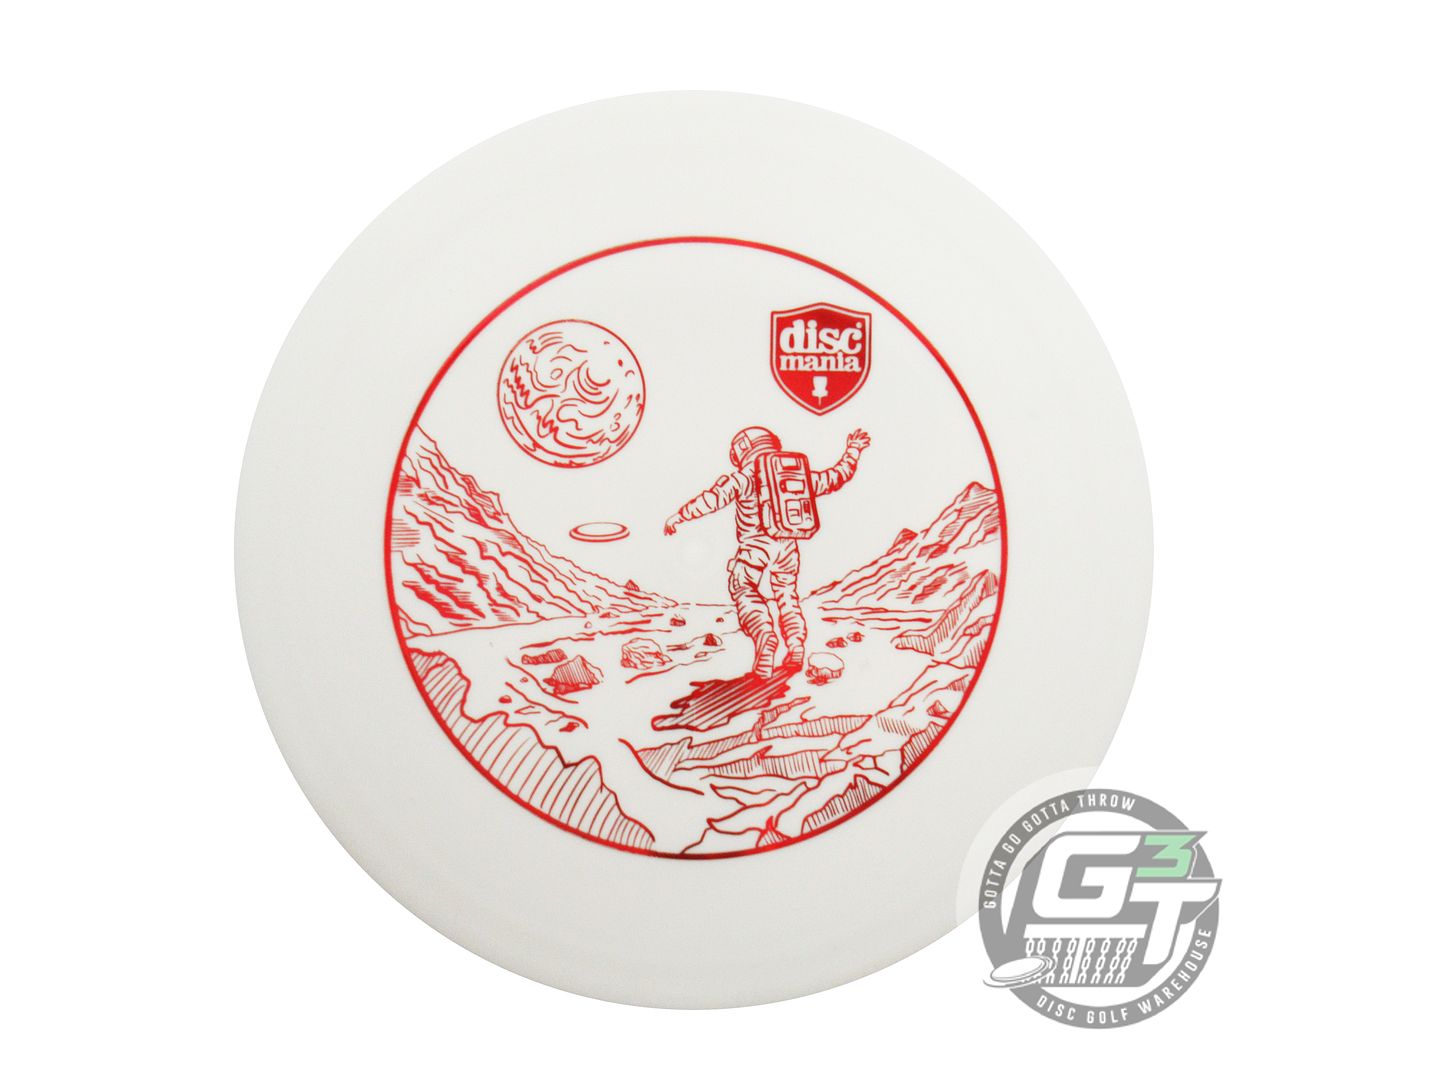 Discmania Limited Edition Moonscape Stamp Glow D-Line Flex 2 FD Fairway Driver Golf Disc (Individually Listed)